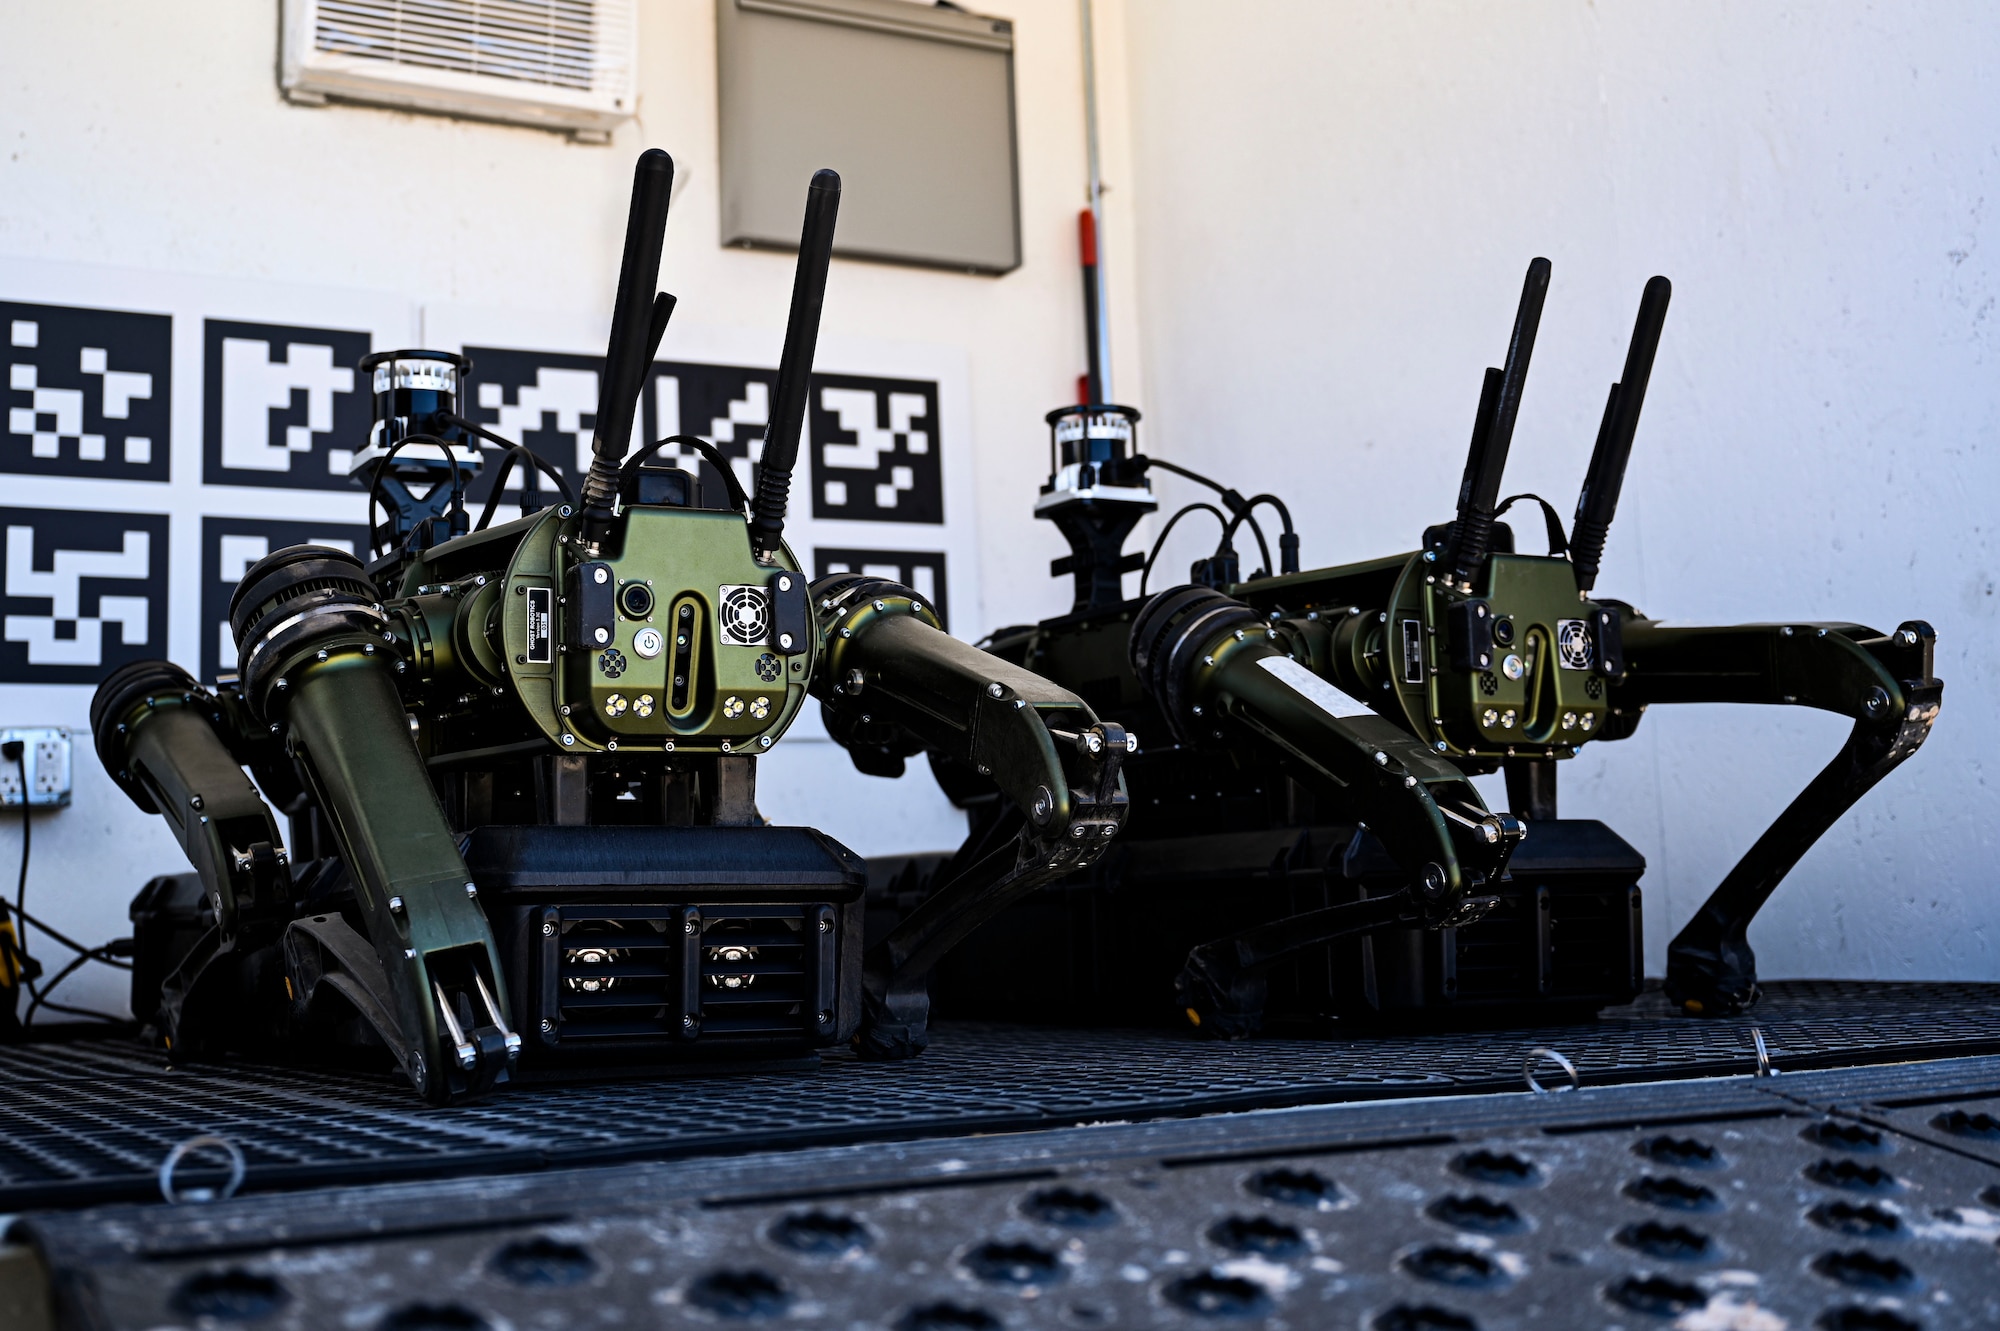 A pair of Vision 60 Q-UGV ground robots charge at their station at Holloman Air Force Base, New Mexico, April 17, 2023. The Vision 60 will be employed by the 49th SFS to monitor and secure the base boundaries for maximum security and reinforcement. (U.S. Air Force photo by Airman 1st Class Isaiah Pedrazzini)